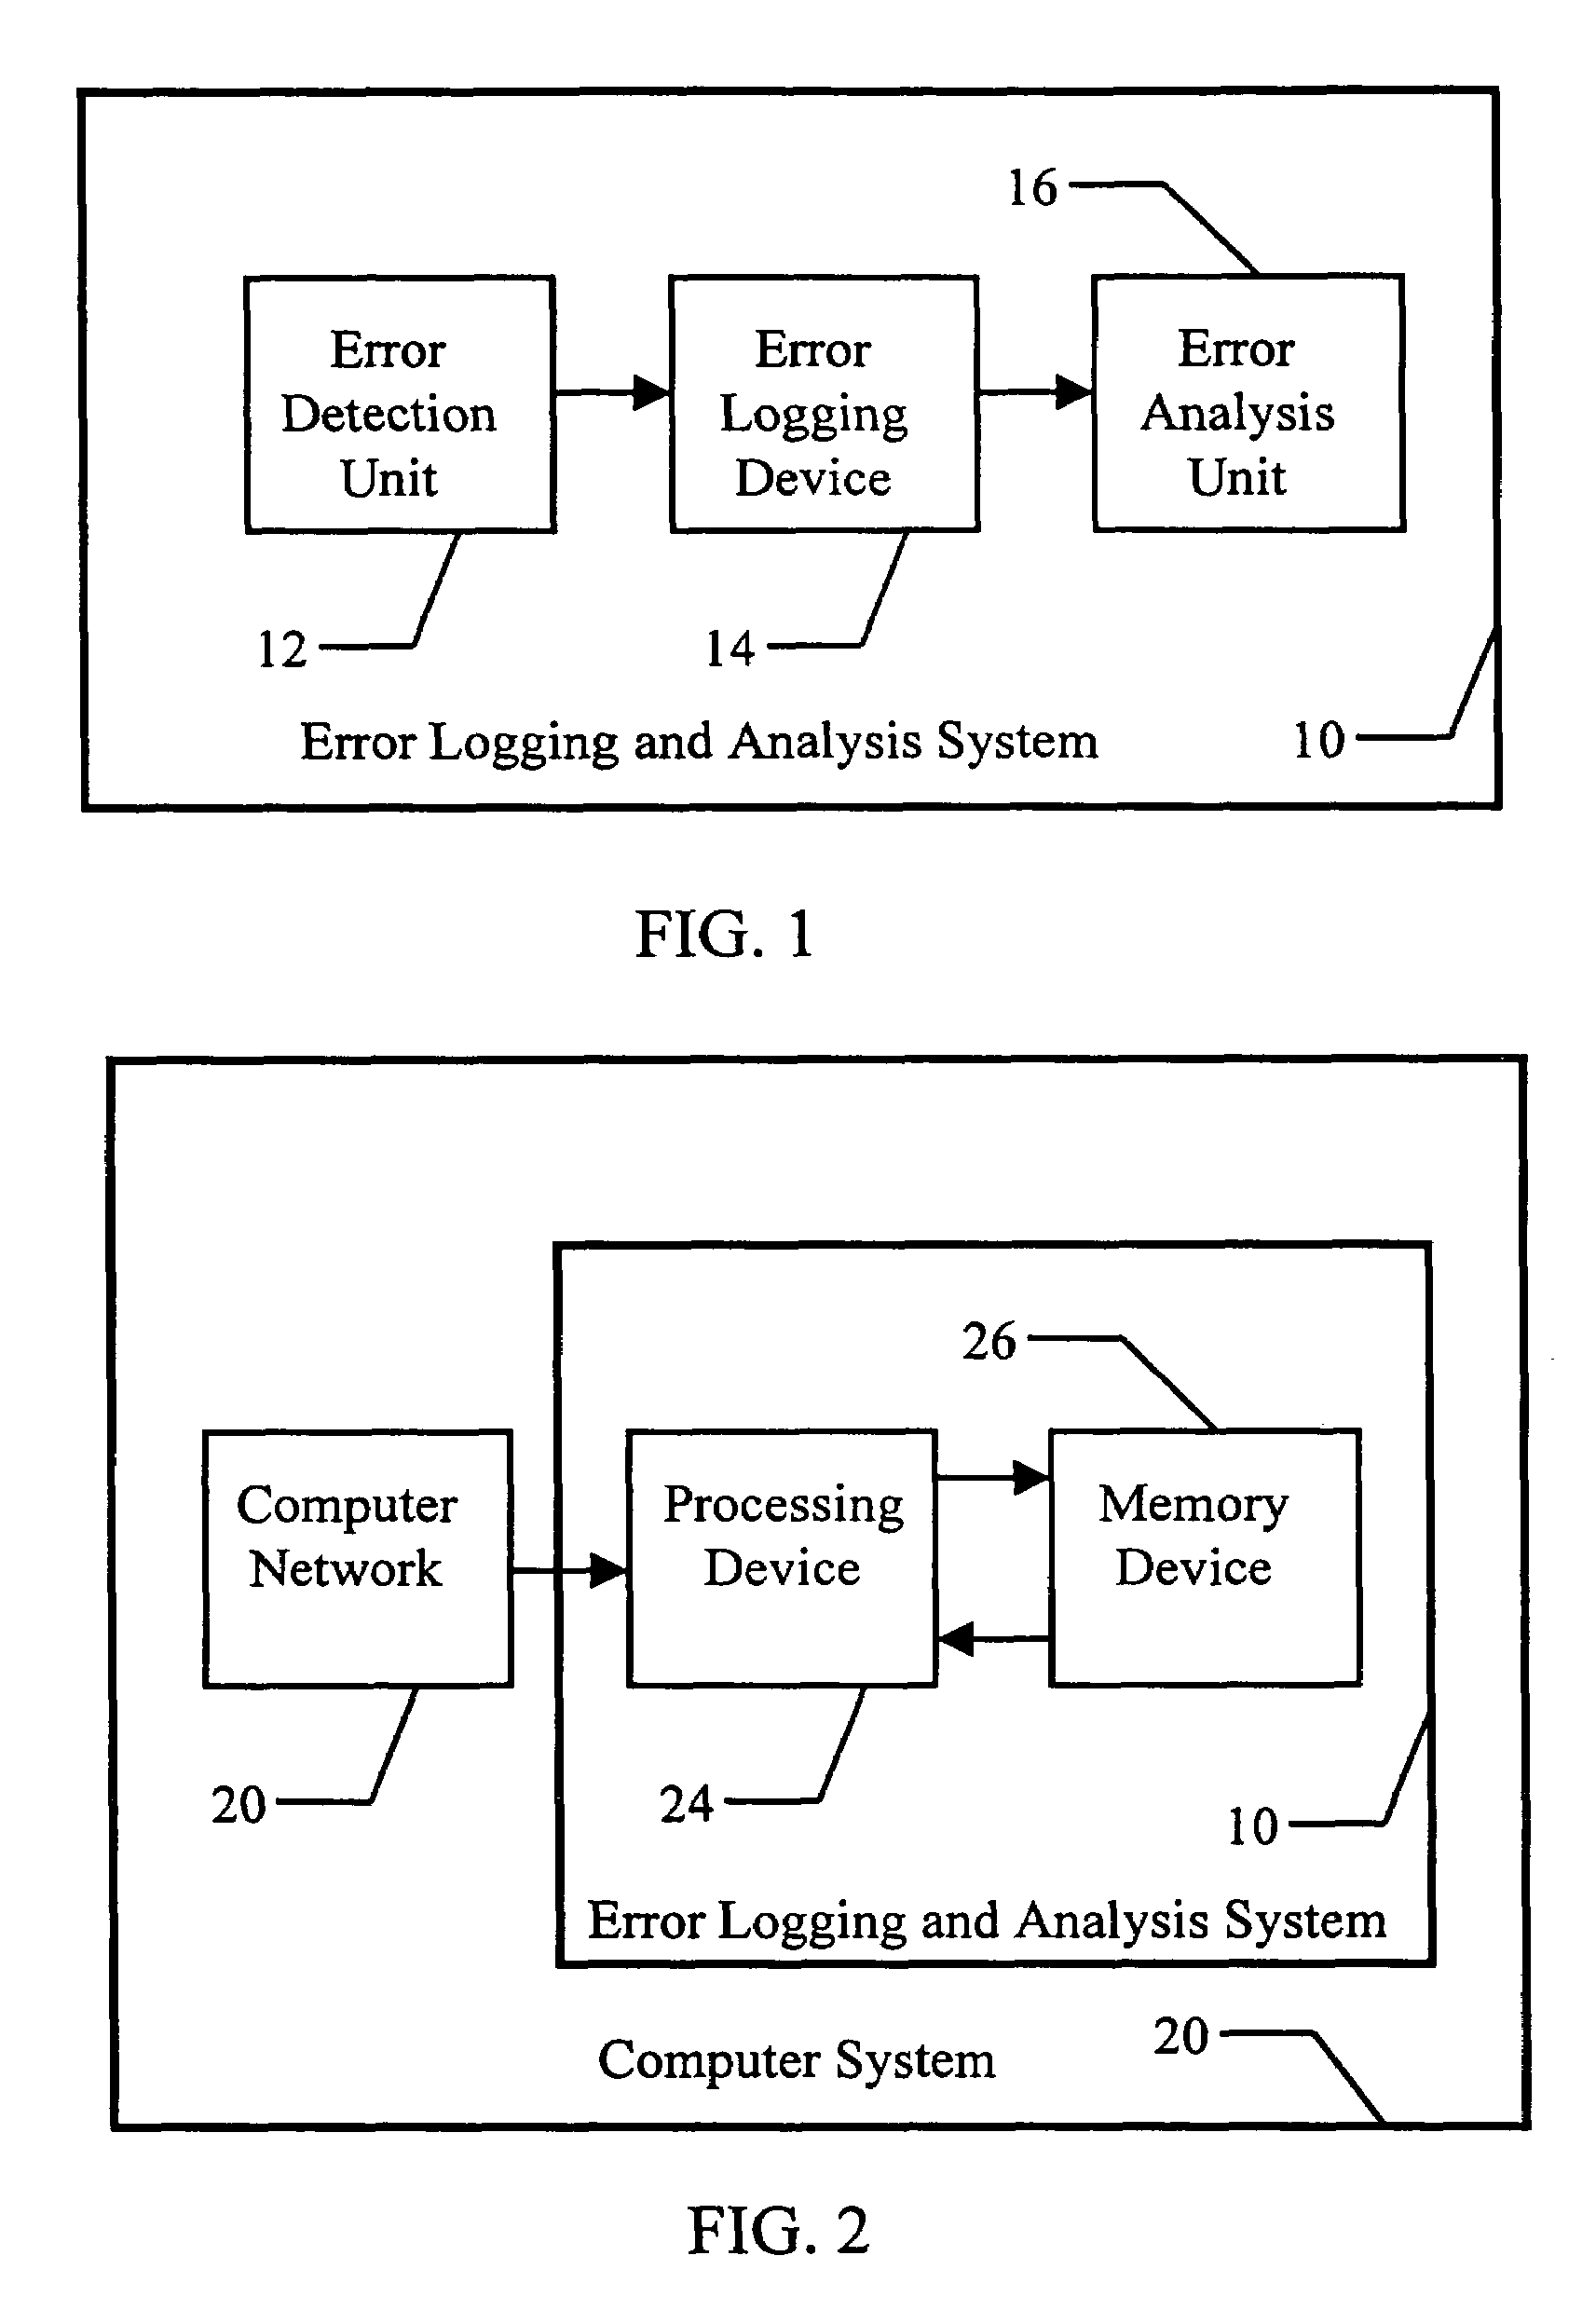 Efficient real-time analysis method of error logs for autonomous systems